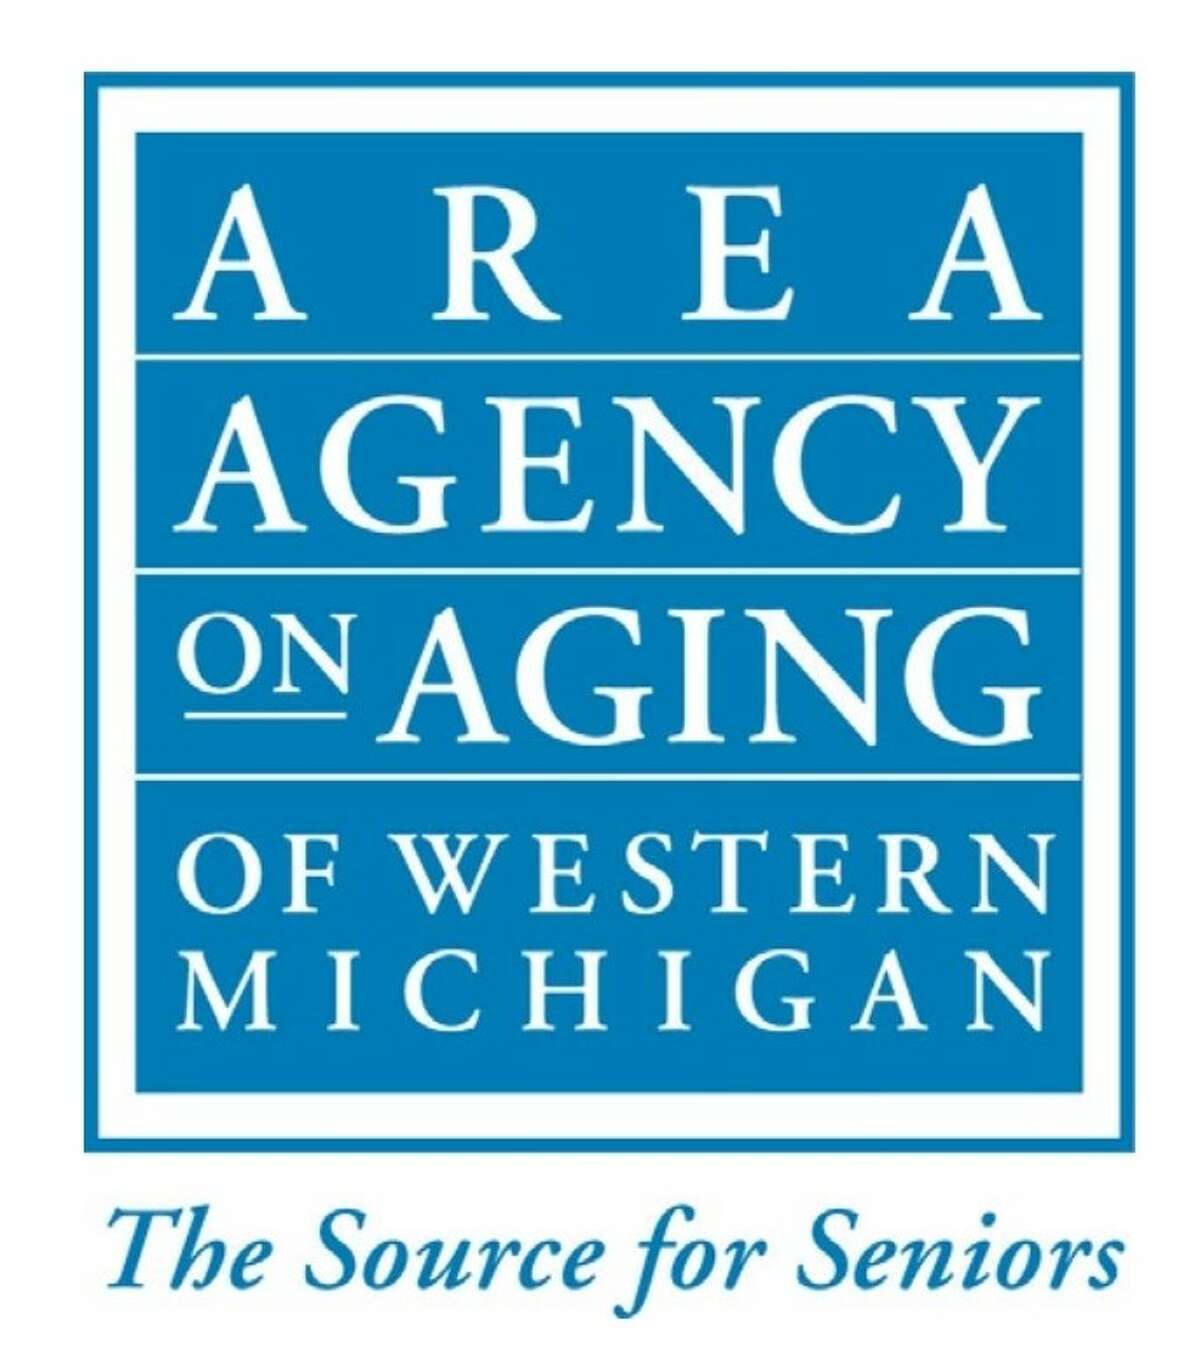 The Area Agency on Aging of Western Michigan (AAAWM) serves the counties of Allegan, Ionia, Lake, Kent, Mason, Mecosta, Montcalm, Newaygo and Osceola.